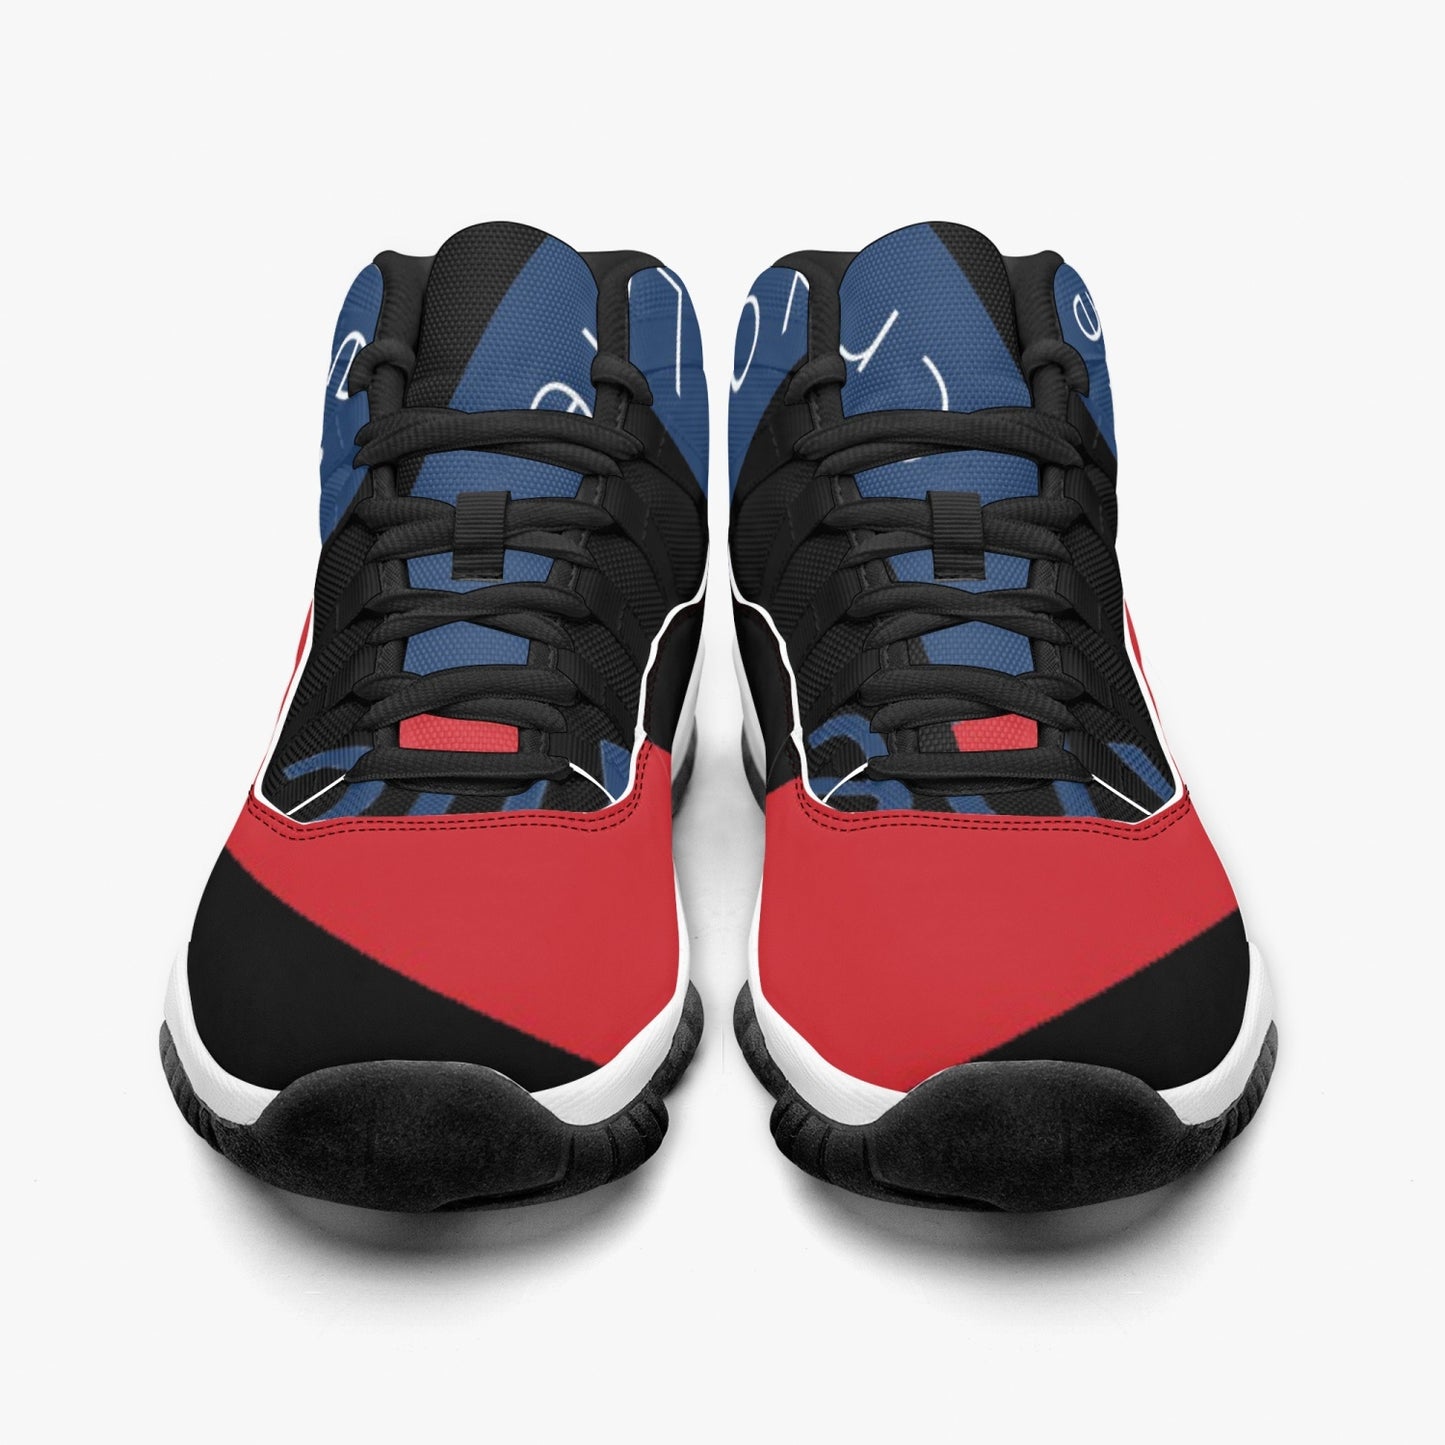 AJ11 Style Basketball Sneakers - Red, White and Blue